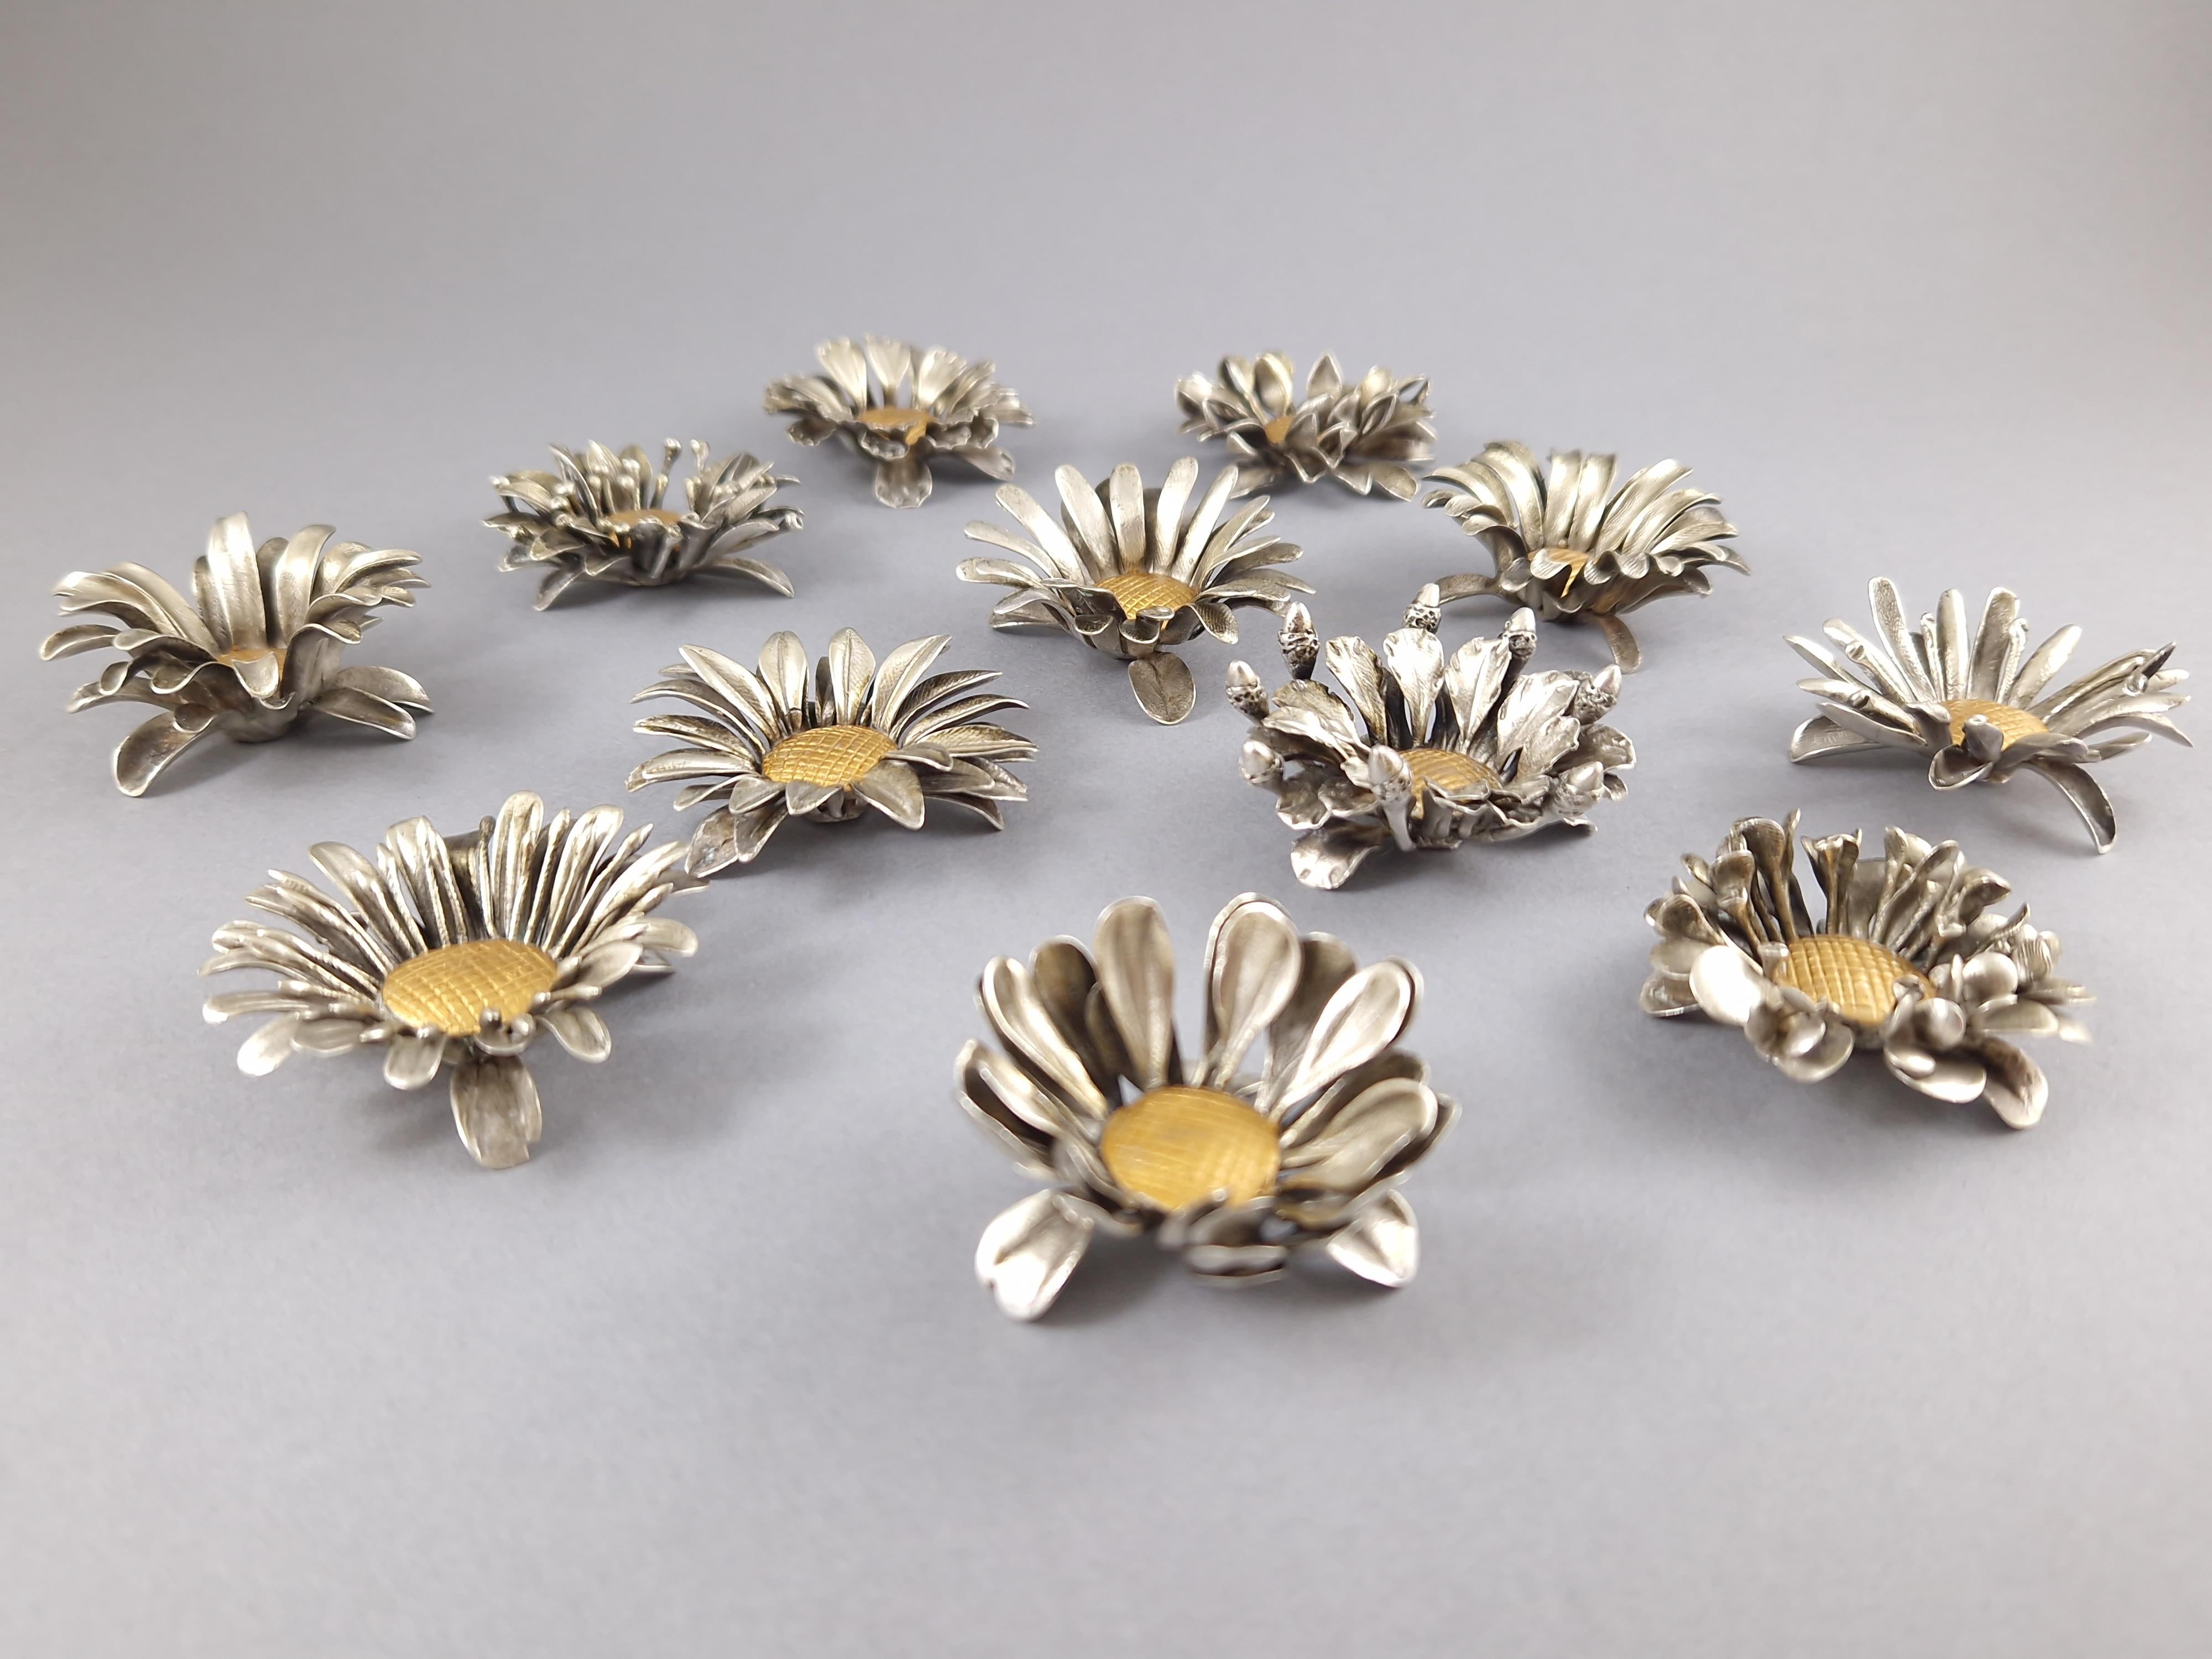 12 Place Card Holders / Table Decor in Solid Silver and Gilt 4